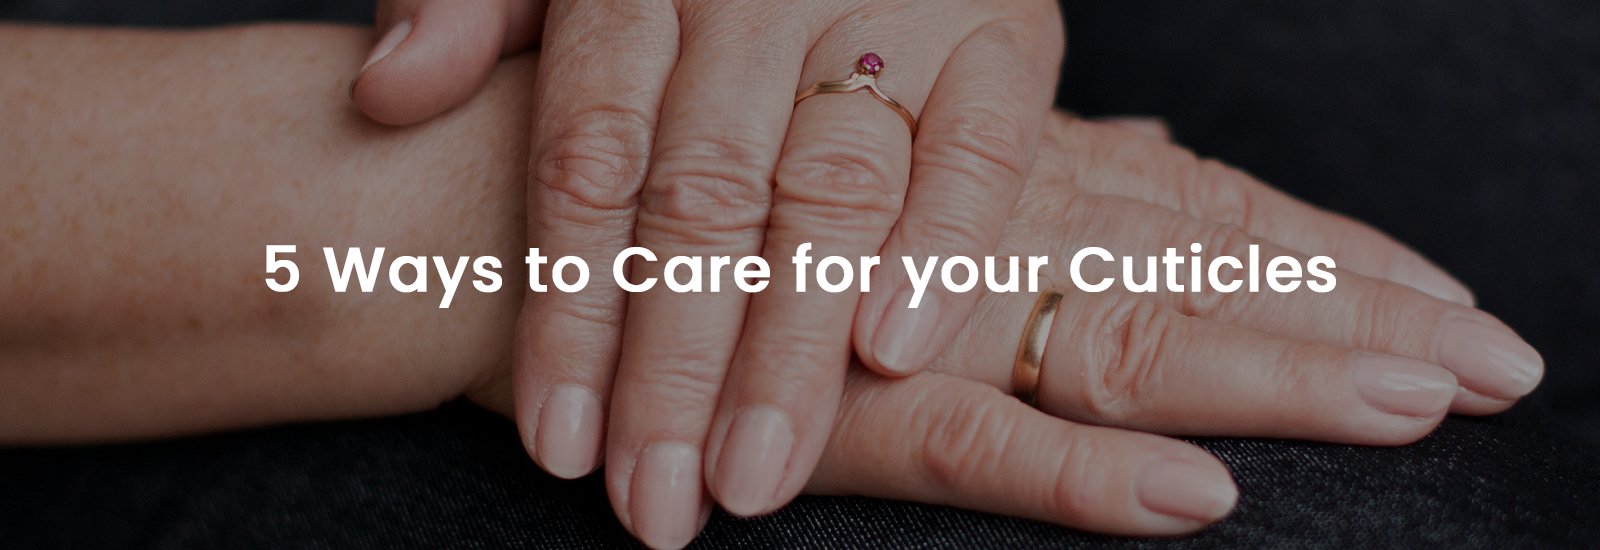 5 Ways For Perfect Cuticle Care |Banner Image